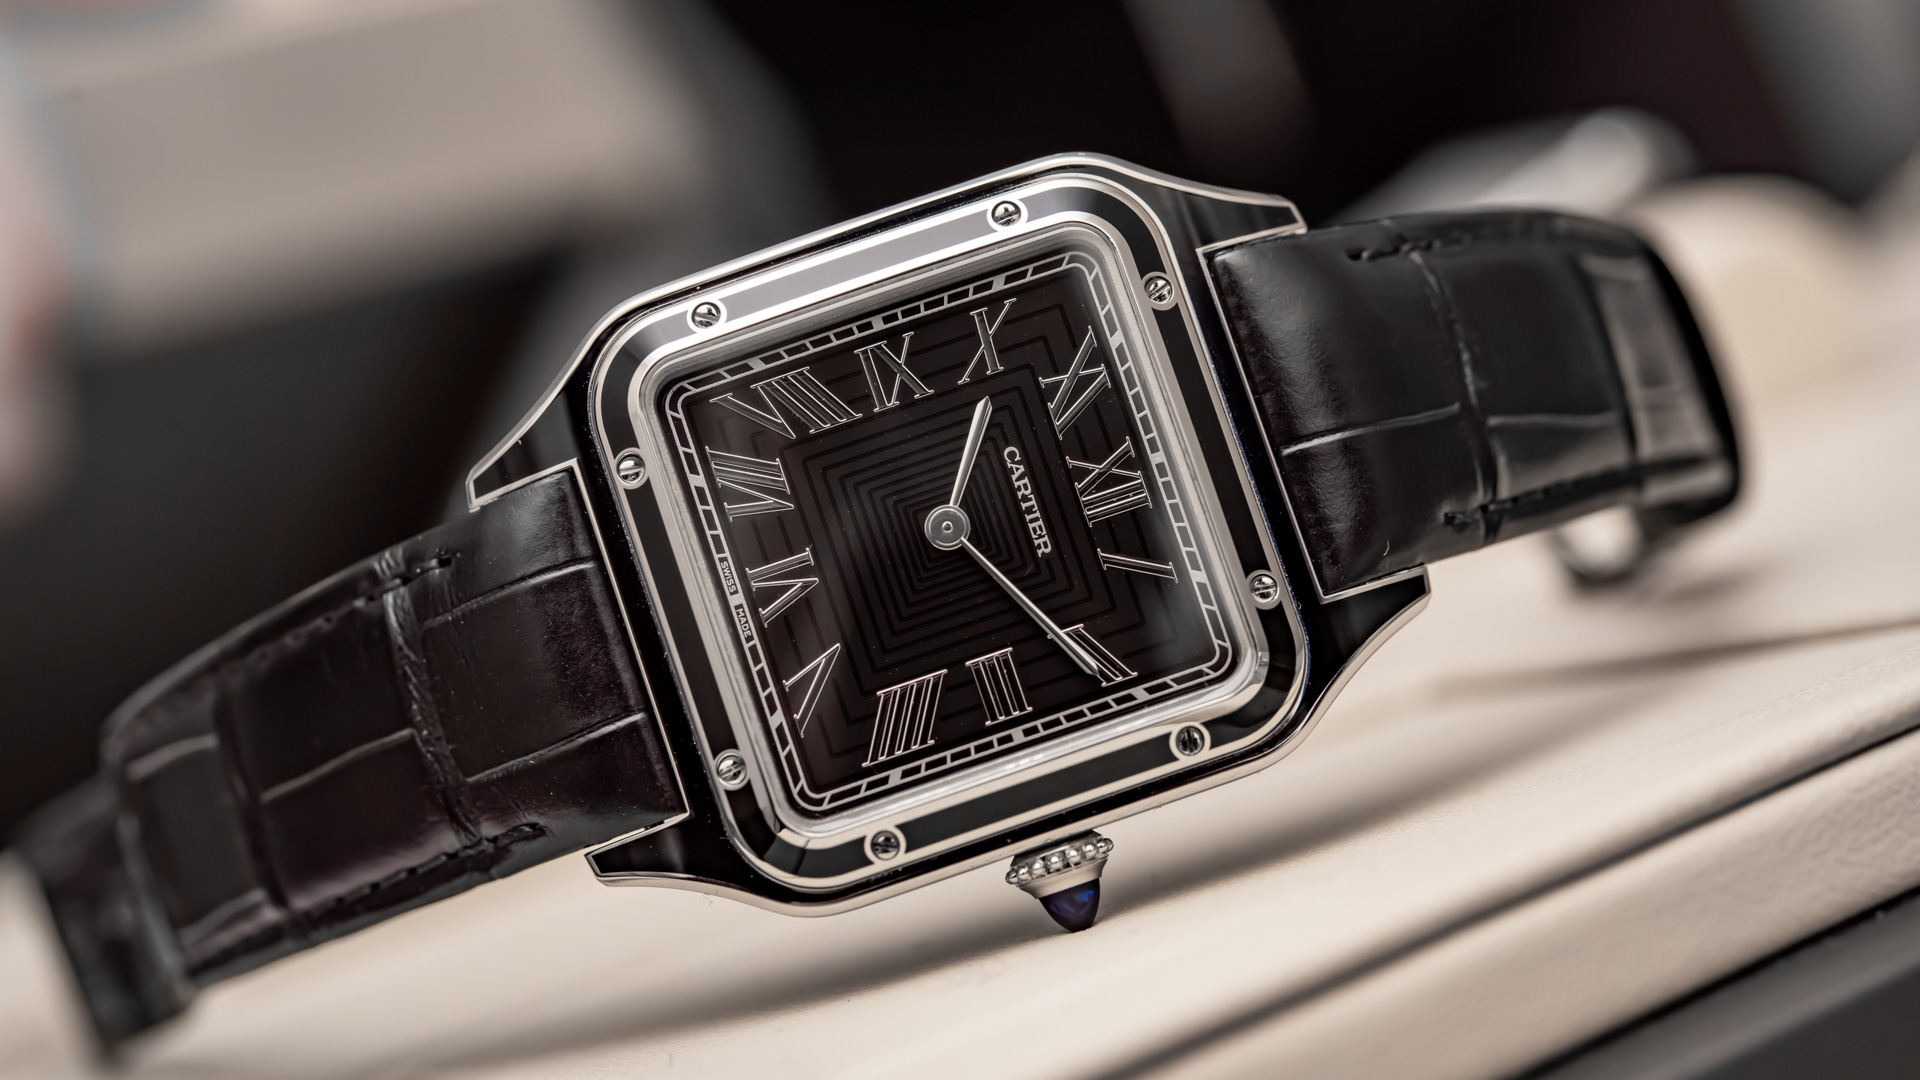 Hands On Cartier Santos Dumont Watches With New Lacquer Bezel Ablogtowatch